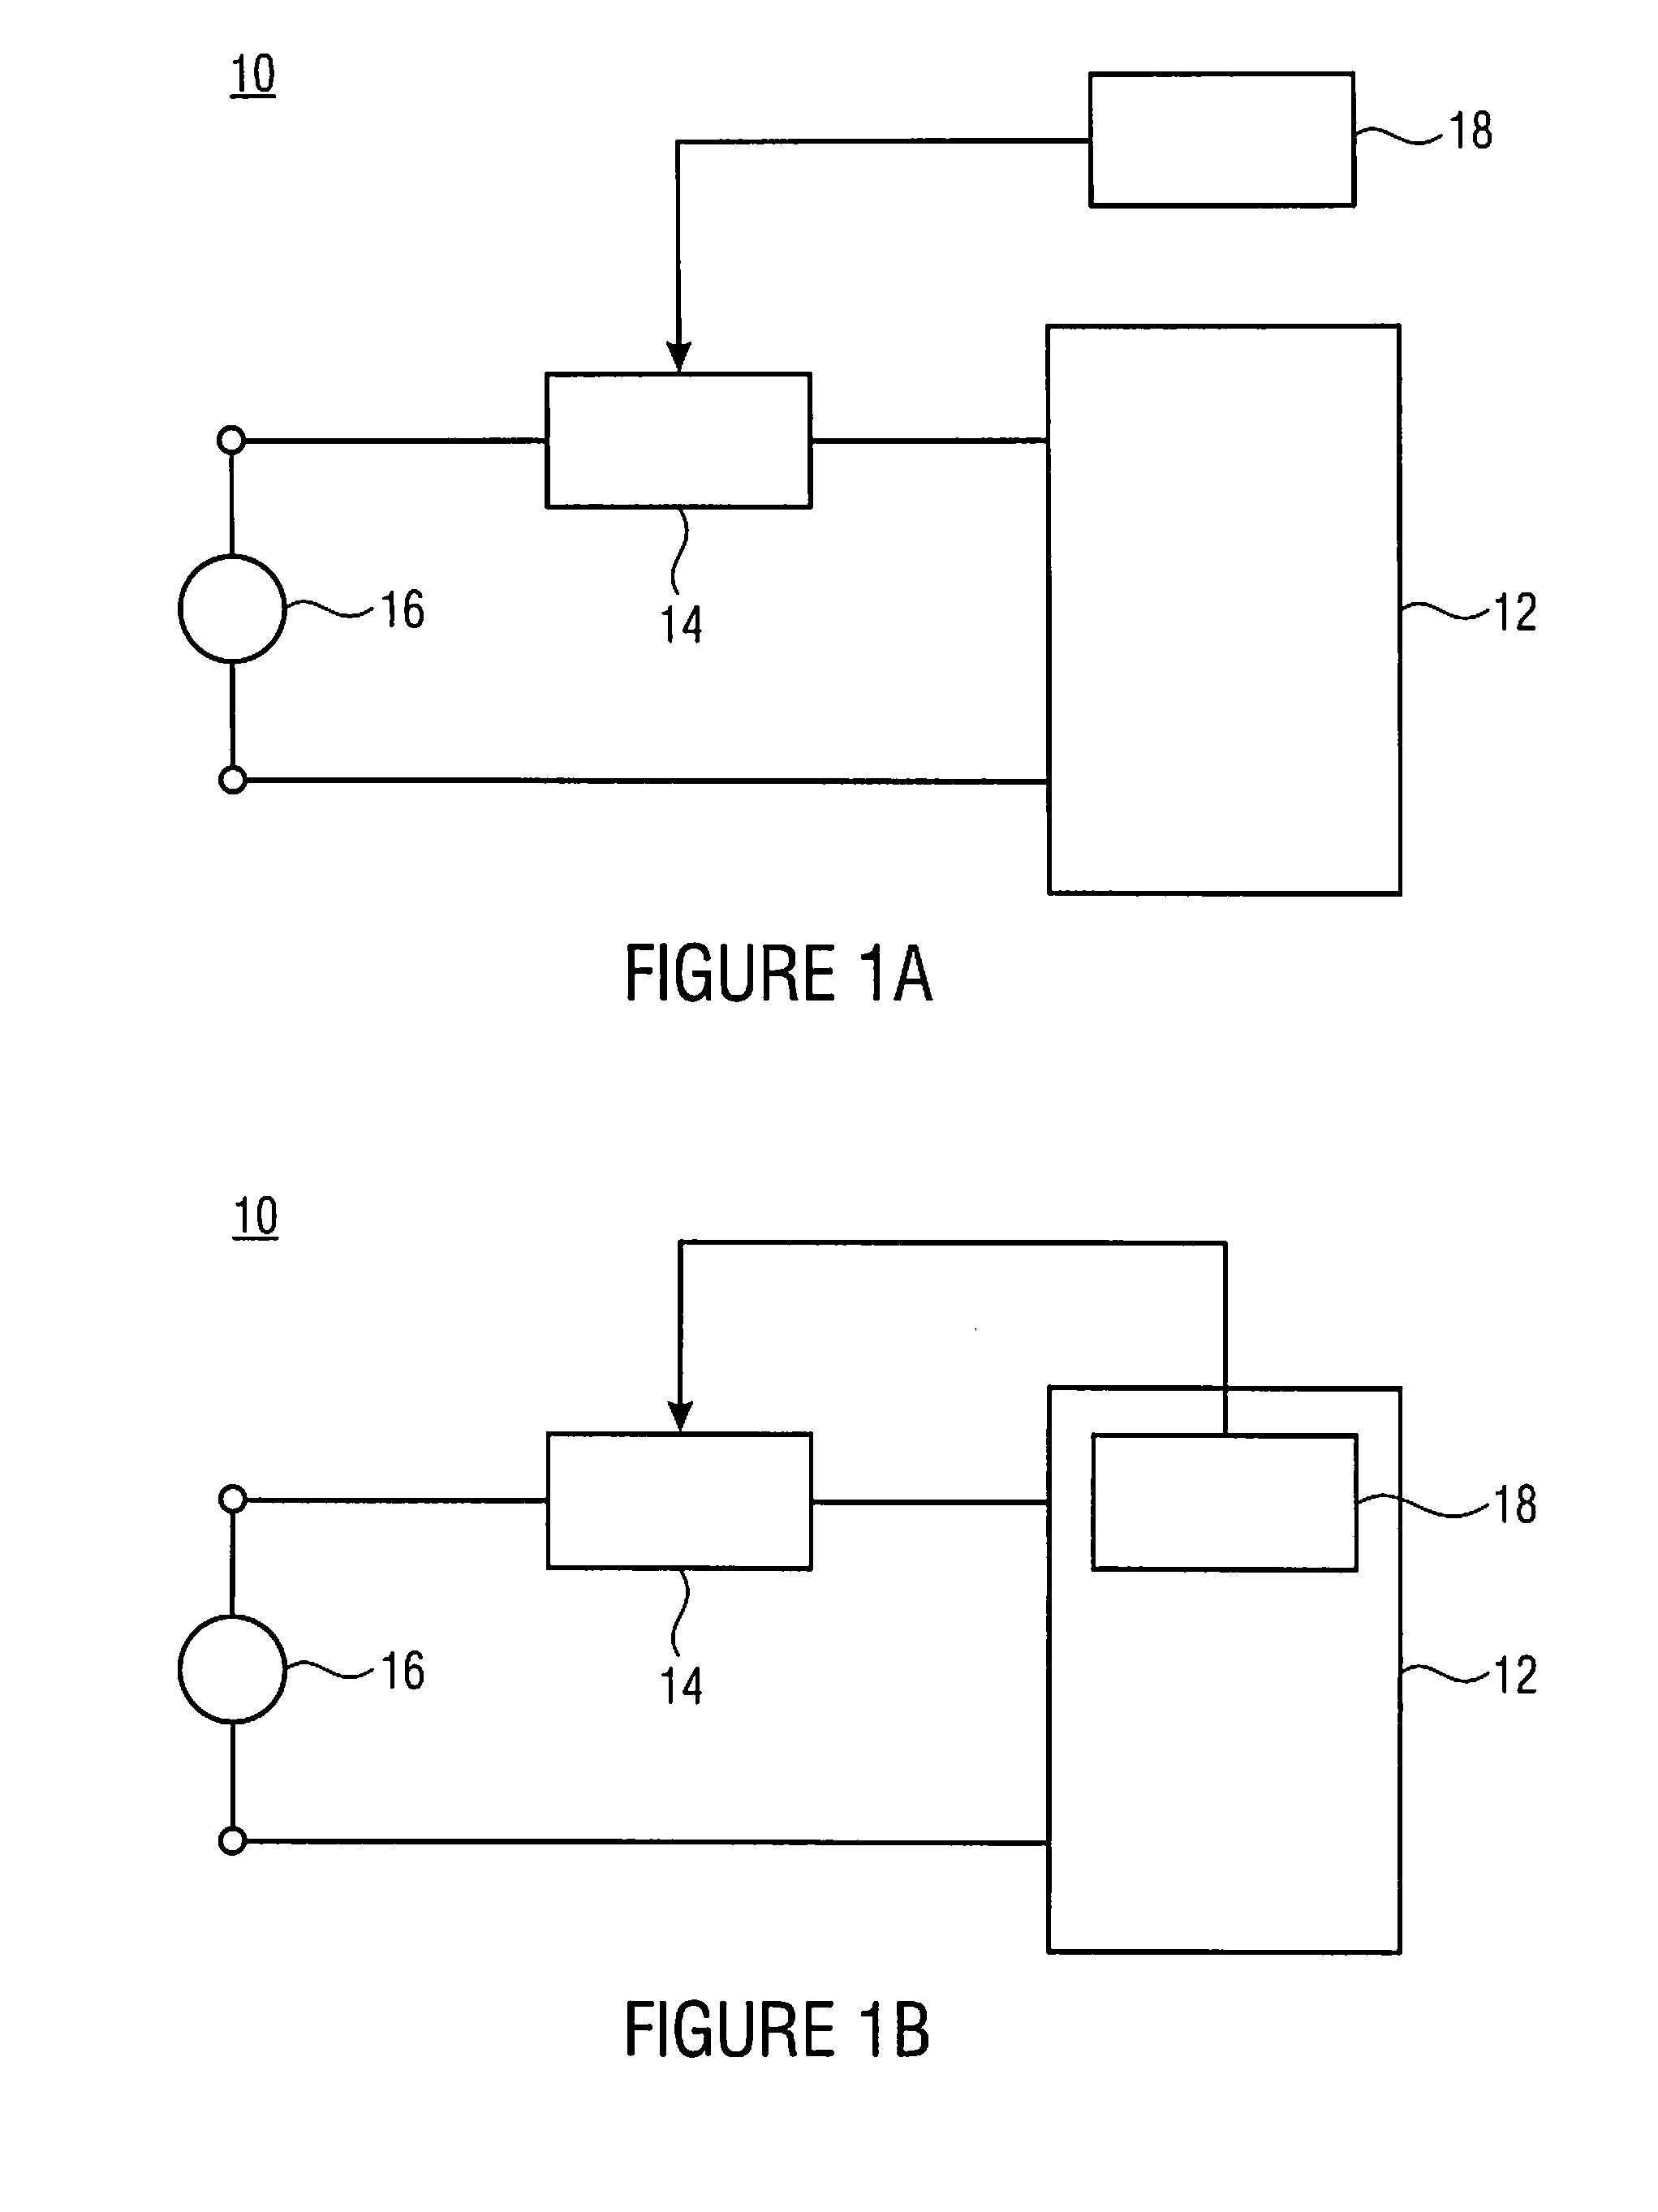 Device and Method for Wiring a Battery Management System